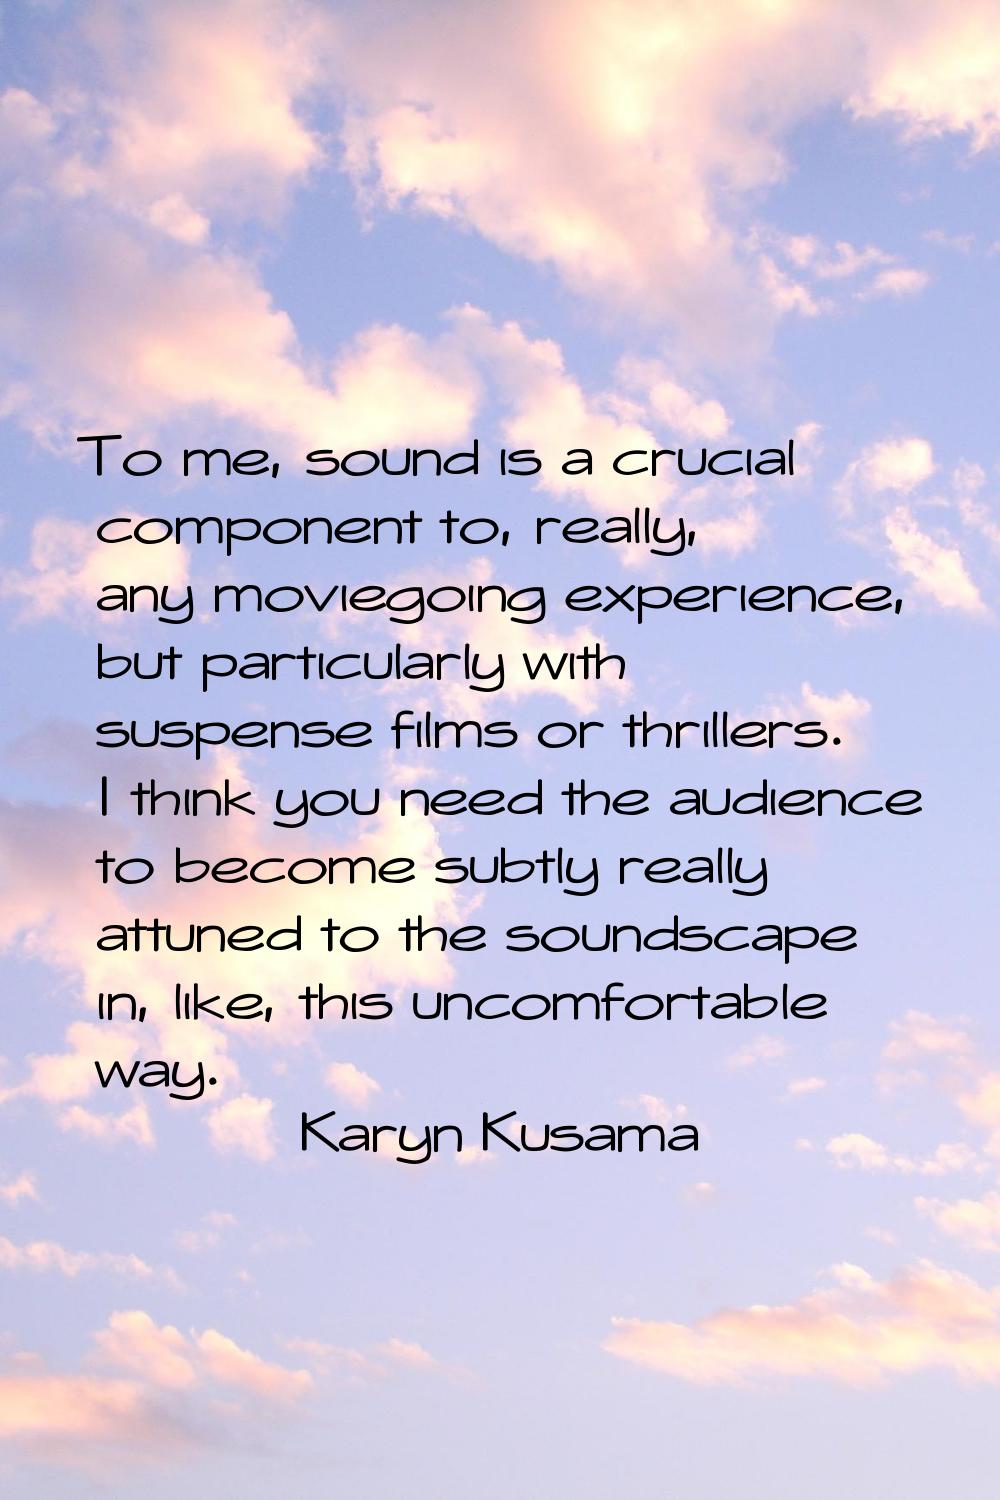 To me, sound is a crucial component to, really, any moviegoing experience, but particularly with su